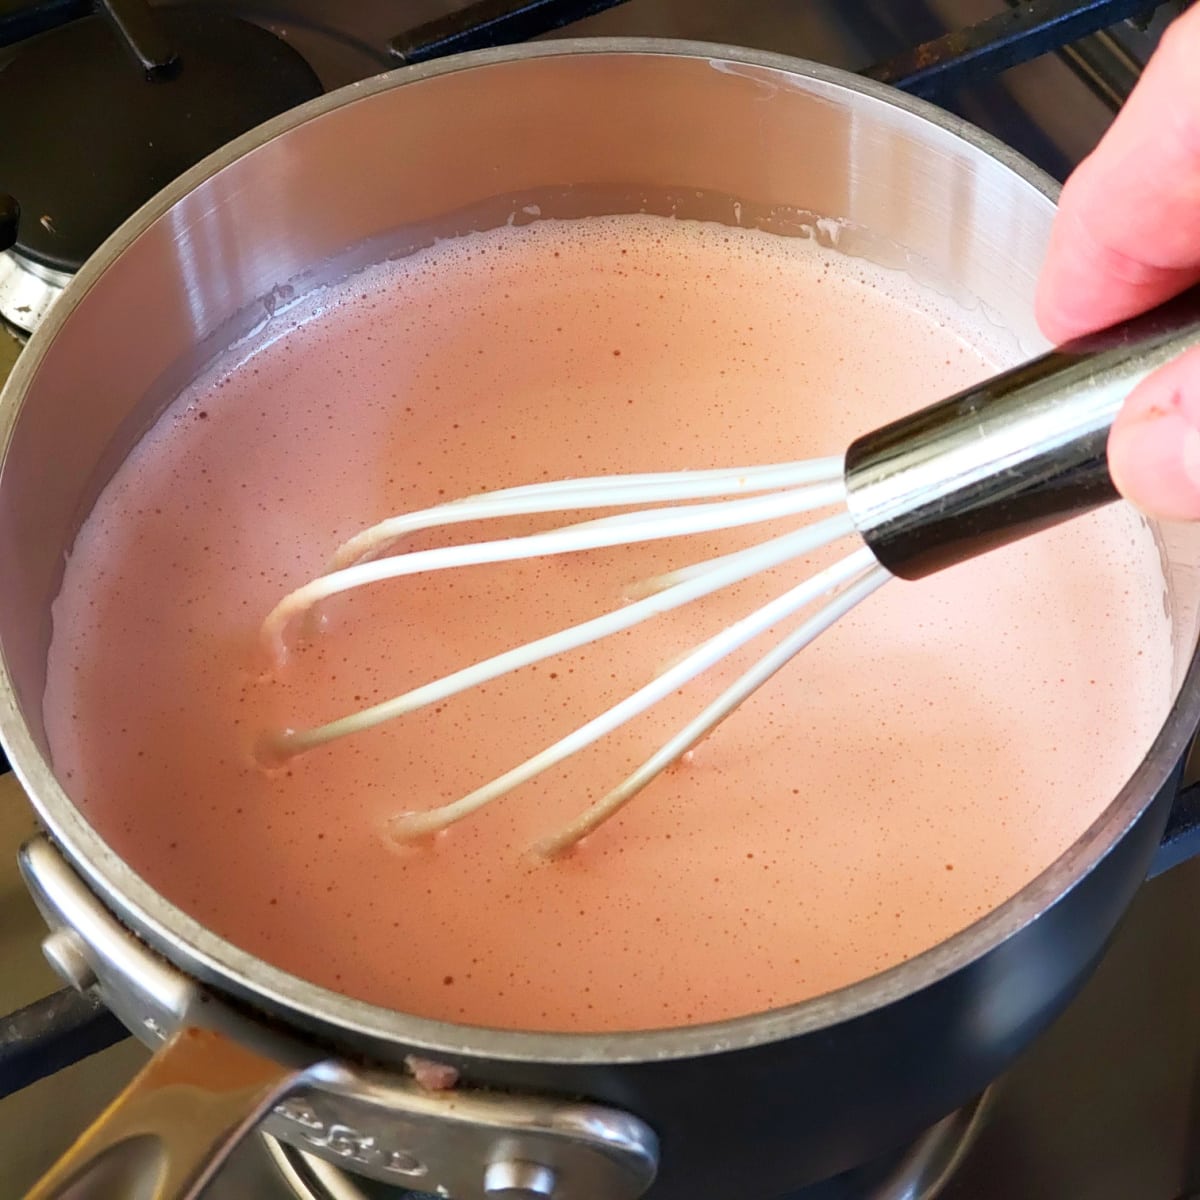 A hand holds a white whisk to stir orange curd in a silver saucepan